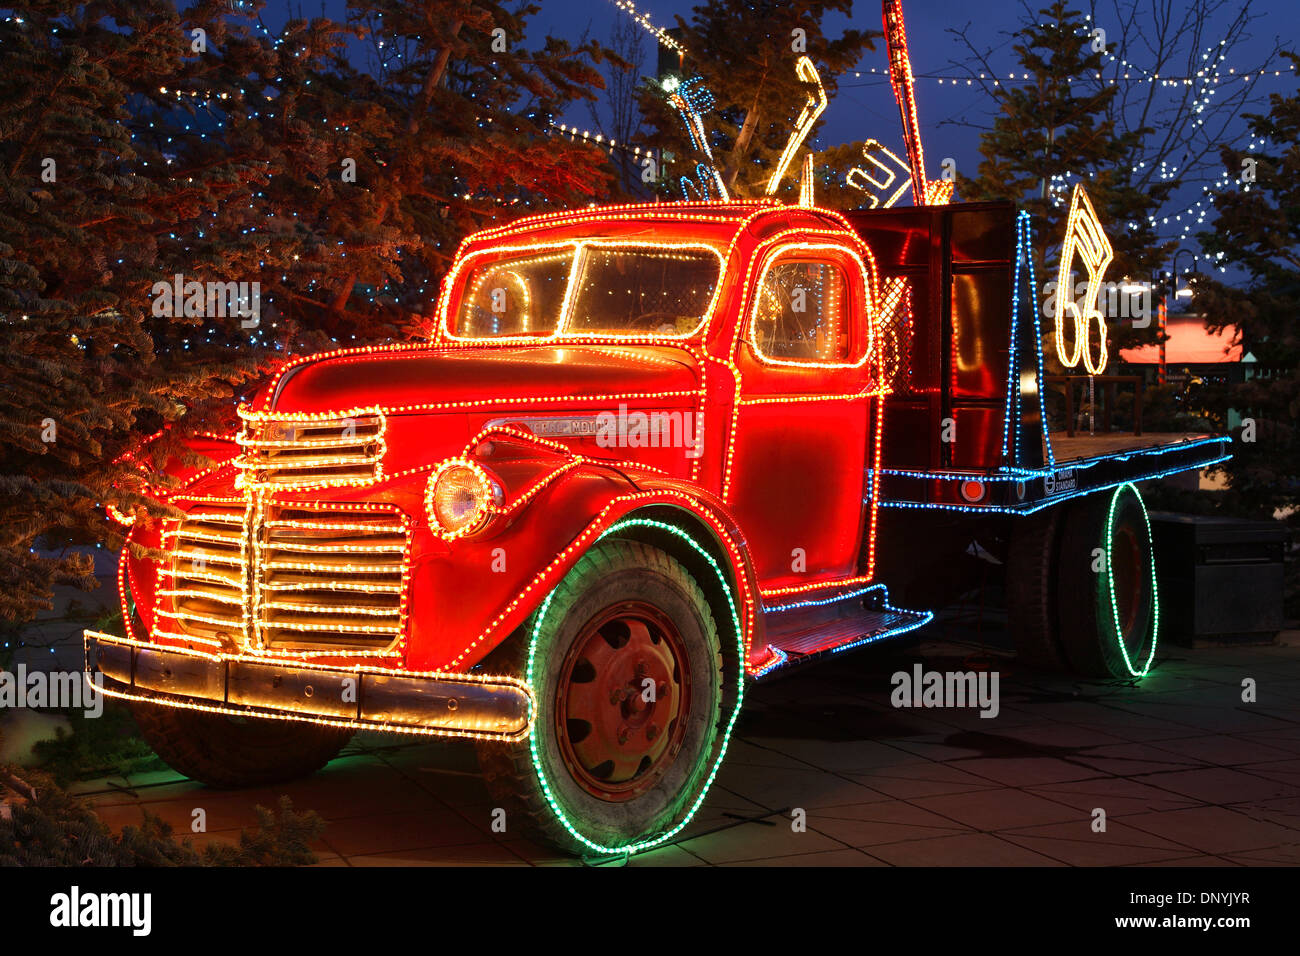 Truck decorated with Christmas lights, River of Lights, Albuquerque Biological Park, Albuquerque, New Mexico USA Stock Photo